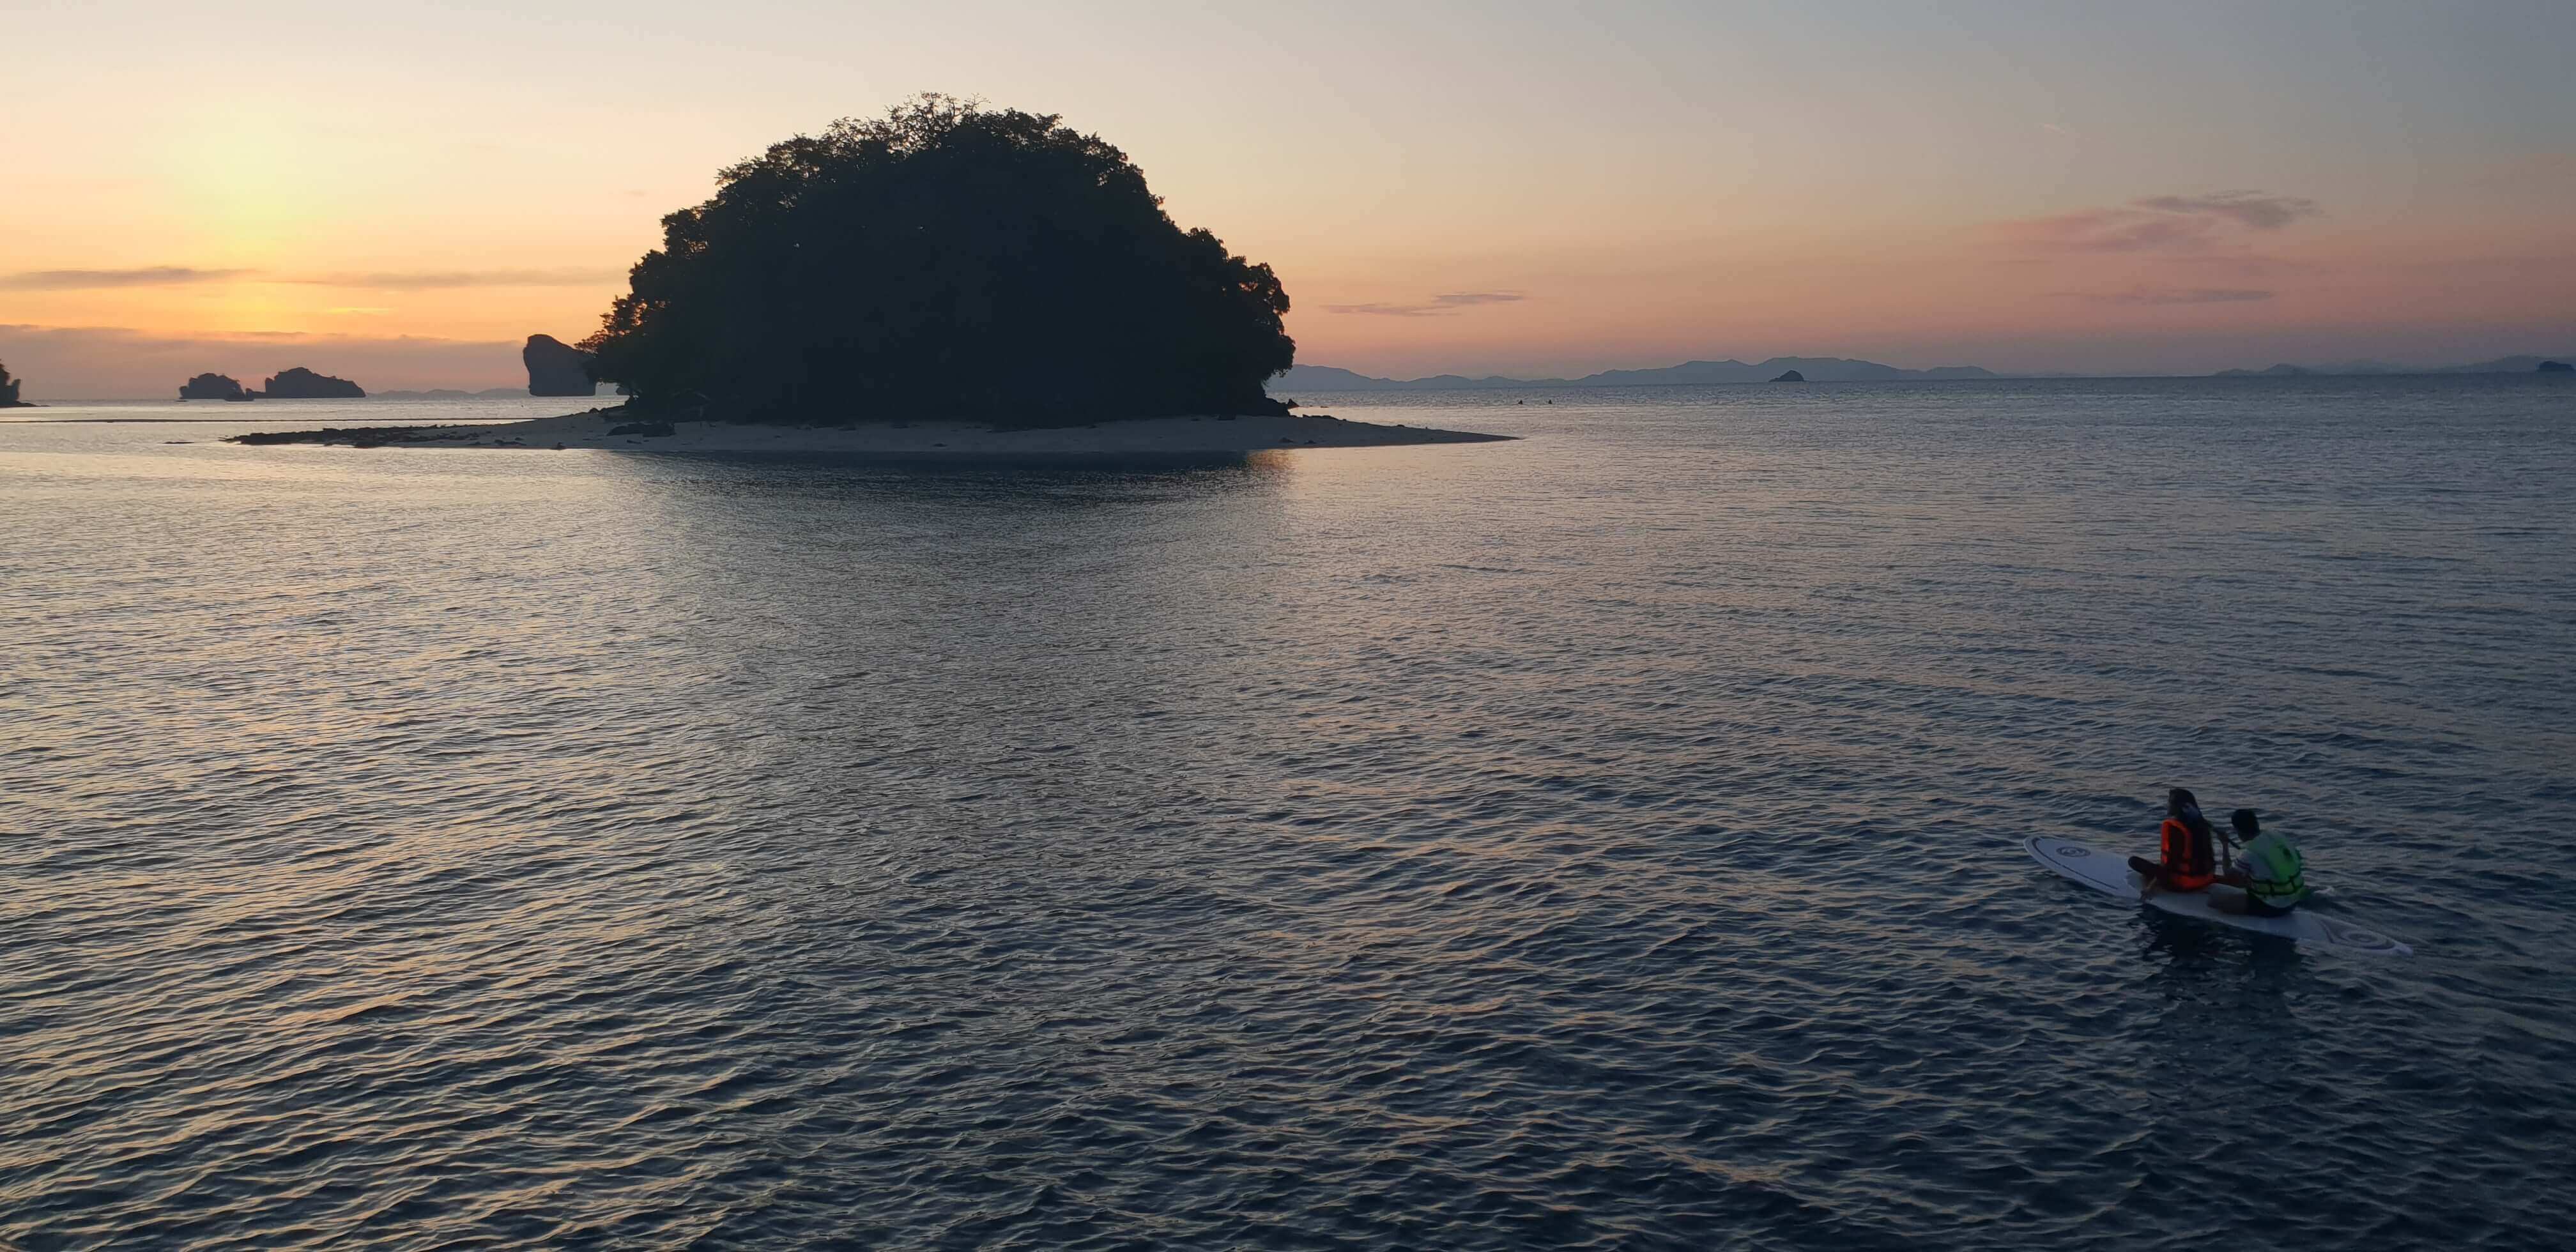 Krabi Sunset Cruise undoubtedly deserves a place in the Ultimate Krabi itinerary